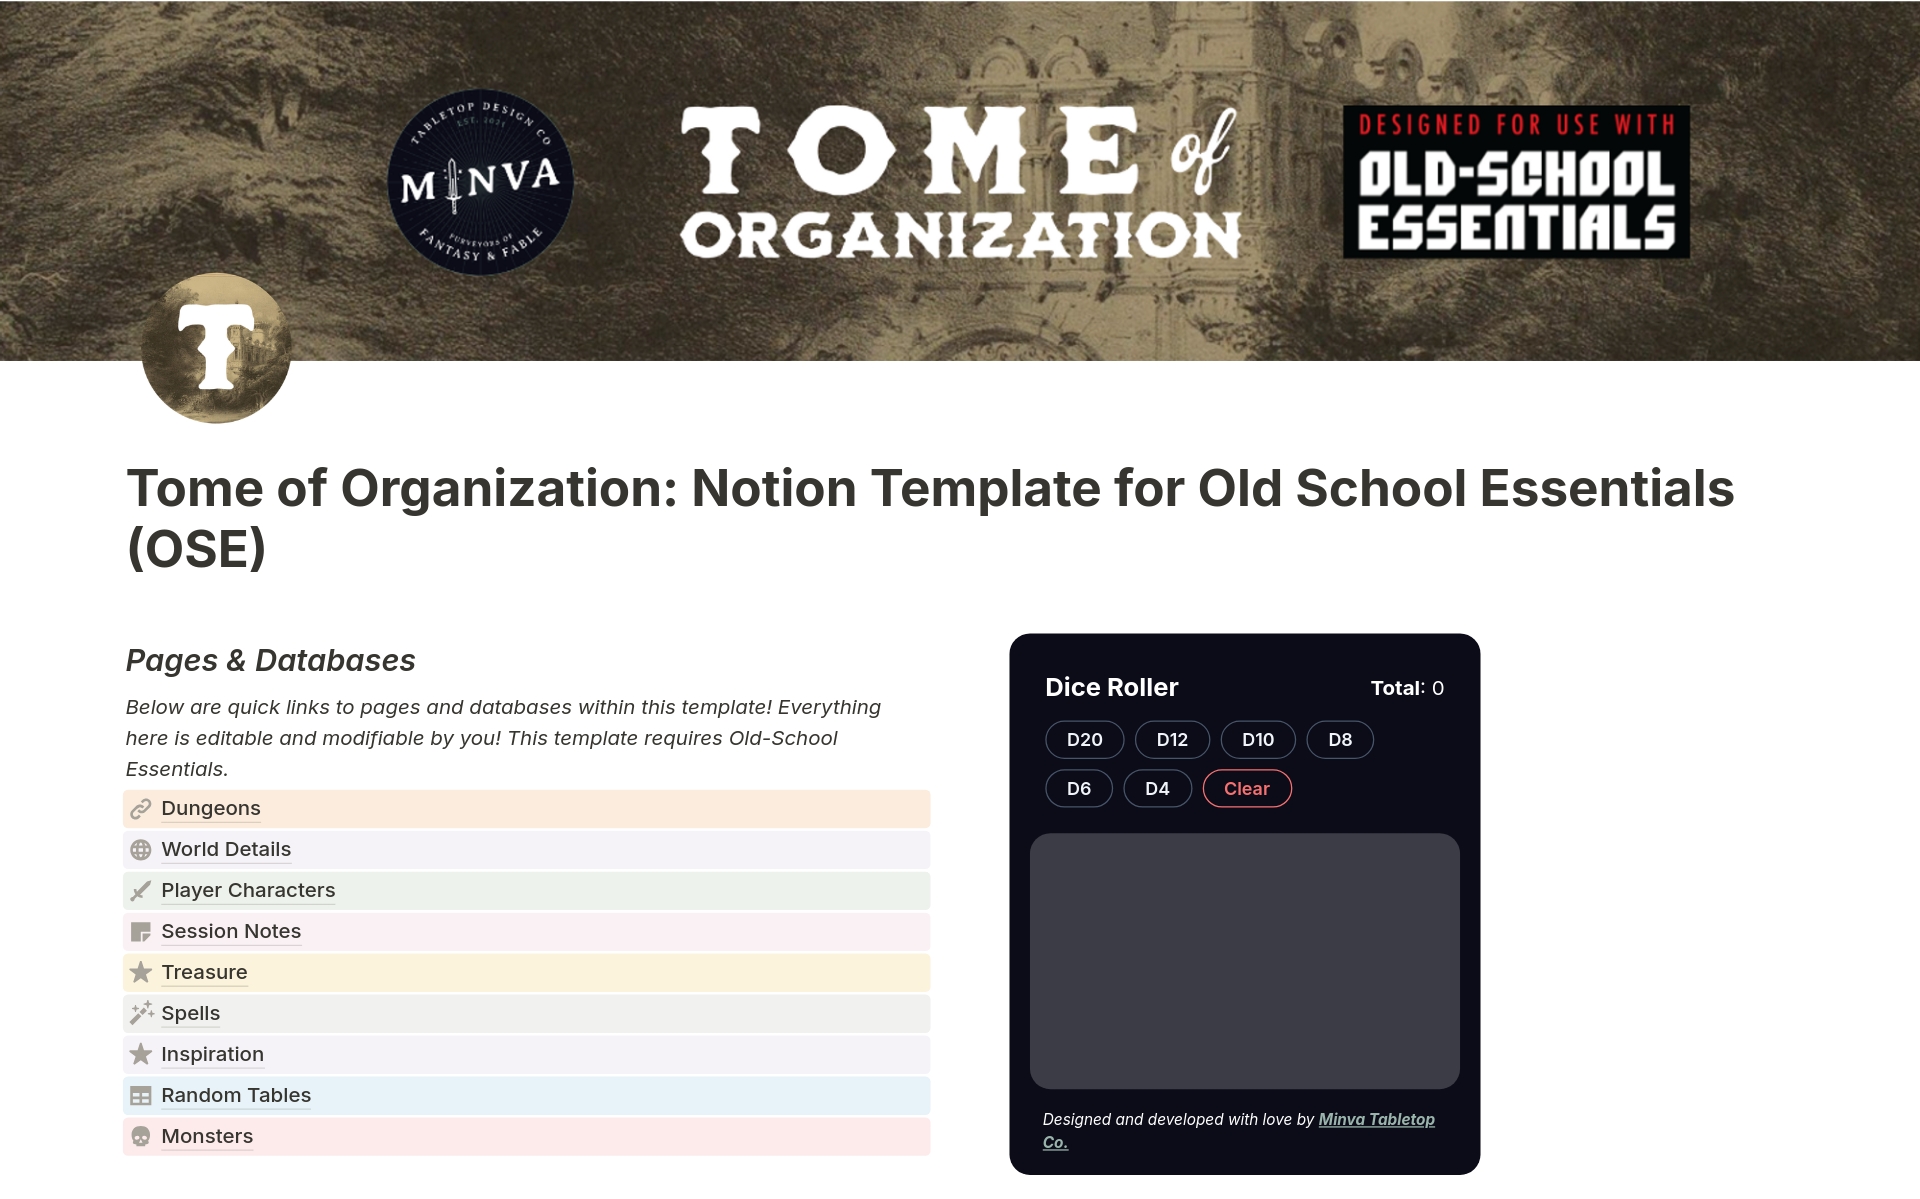 Just because you love Old-School Essentials, doesn't mean you have to use old-school tools! The Tome of Organization Notion Template for OSE uses powerful interconnected databases, pre-built templates, and much more. 